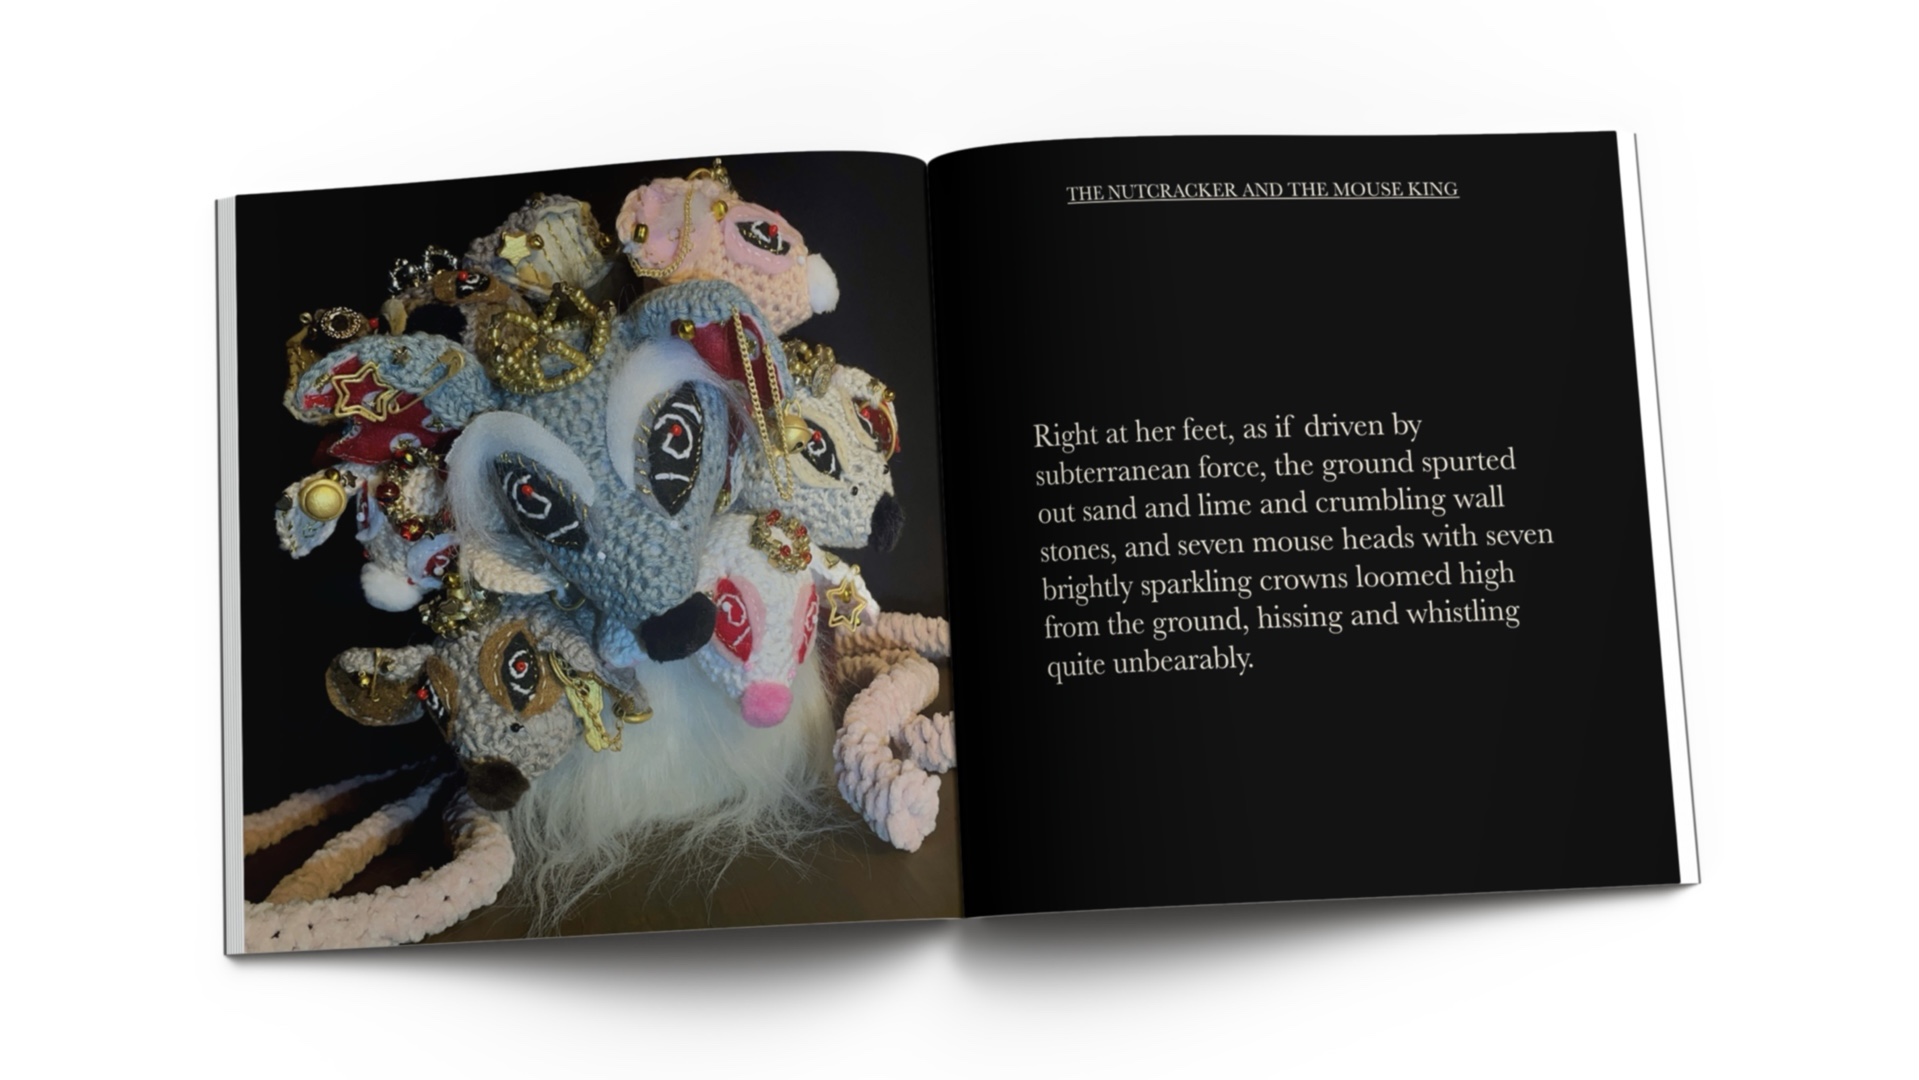 Book spread with photo of knitted mouse with seven heads on left and text on right